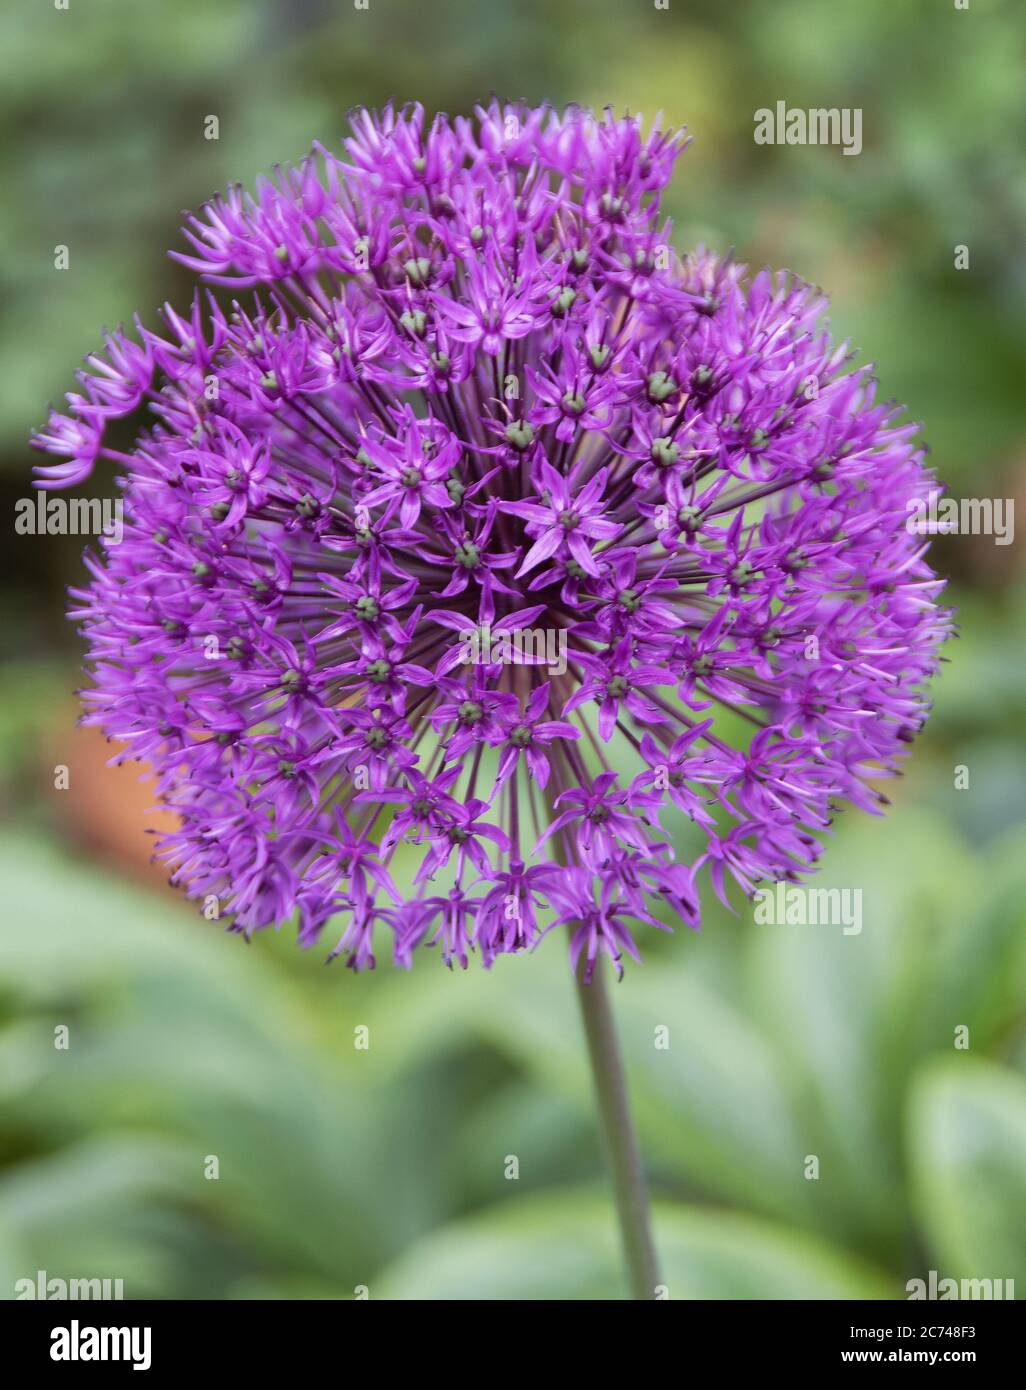 Allium 'Purple Sensation' is a perennial to 90cm, with short basal leaves dying down by flowering time. Flowers small, vivid rosy-purple, in crowded s Stock Photo